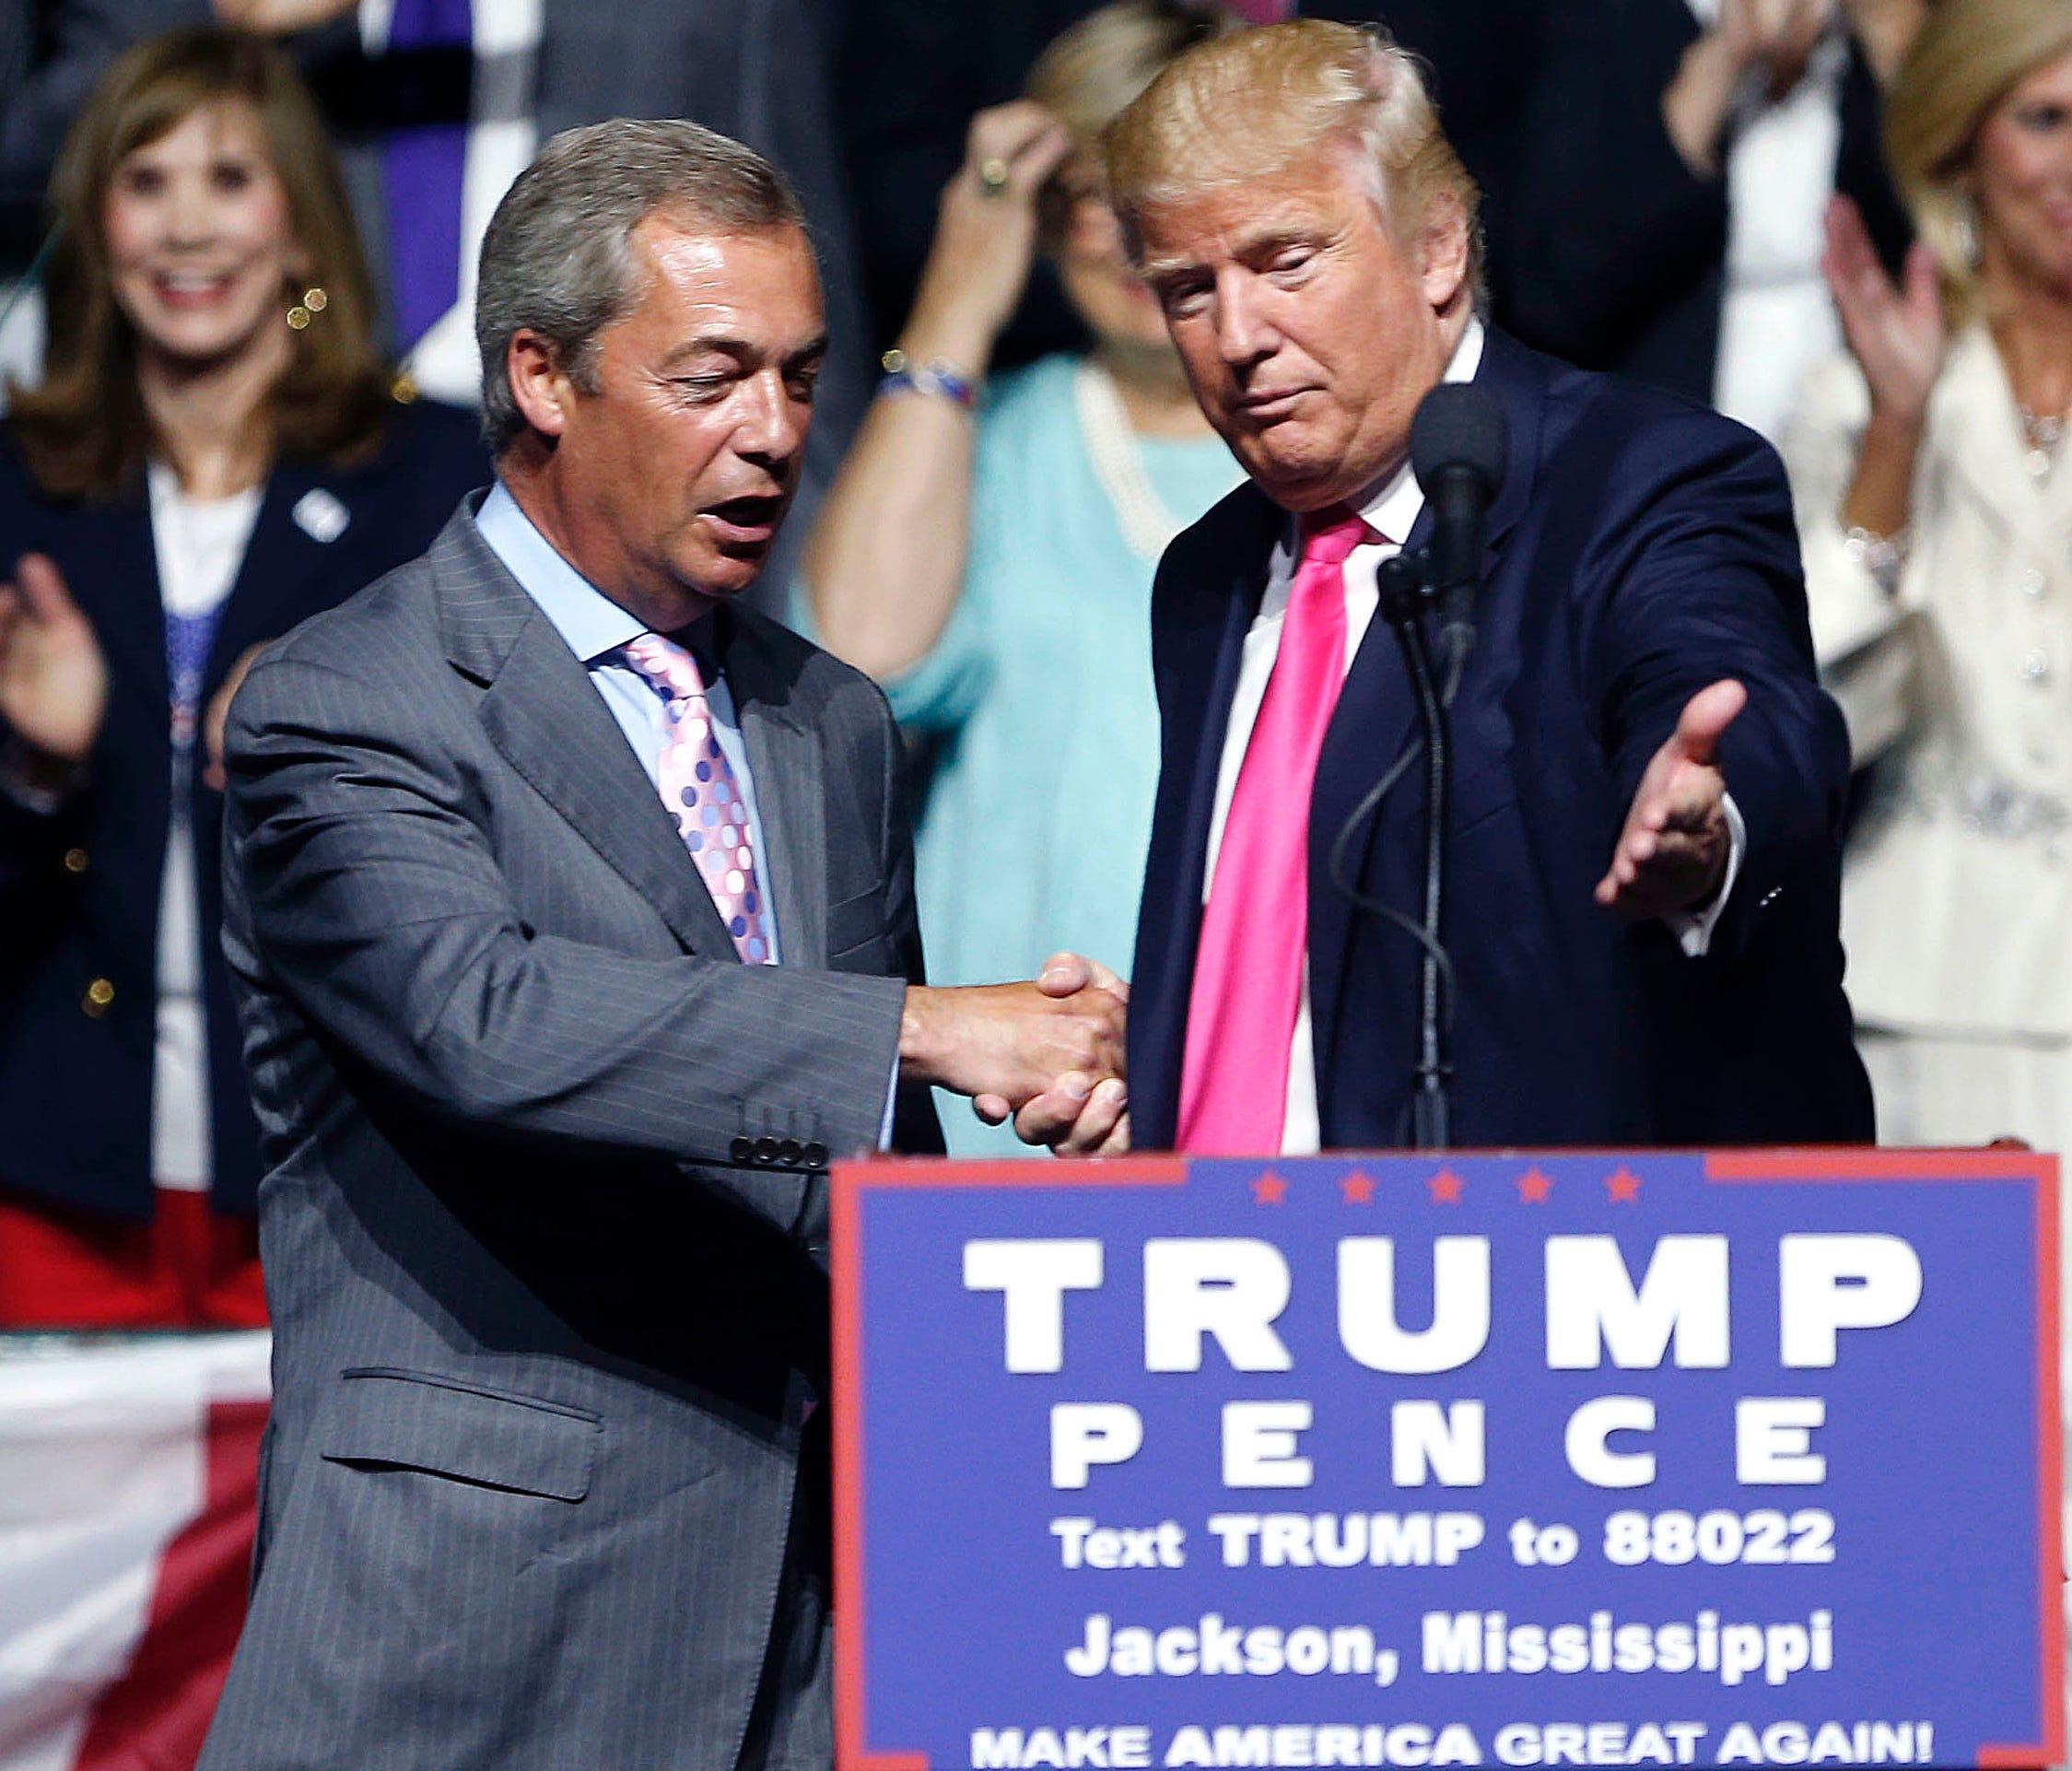 In this is a Wednesday, Aug. 24, 2016 file photo, the now President-elect Donald Trump welcomes pro-Brexit British politician Nigel Farage, to speak at a campaign rally in Jackson, Miss.